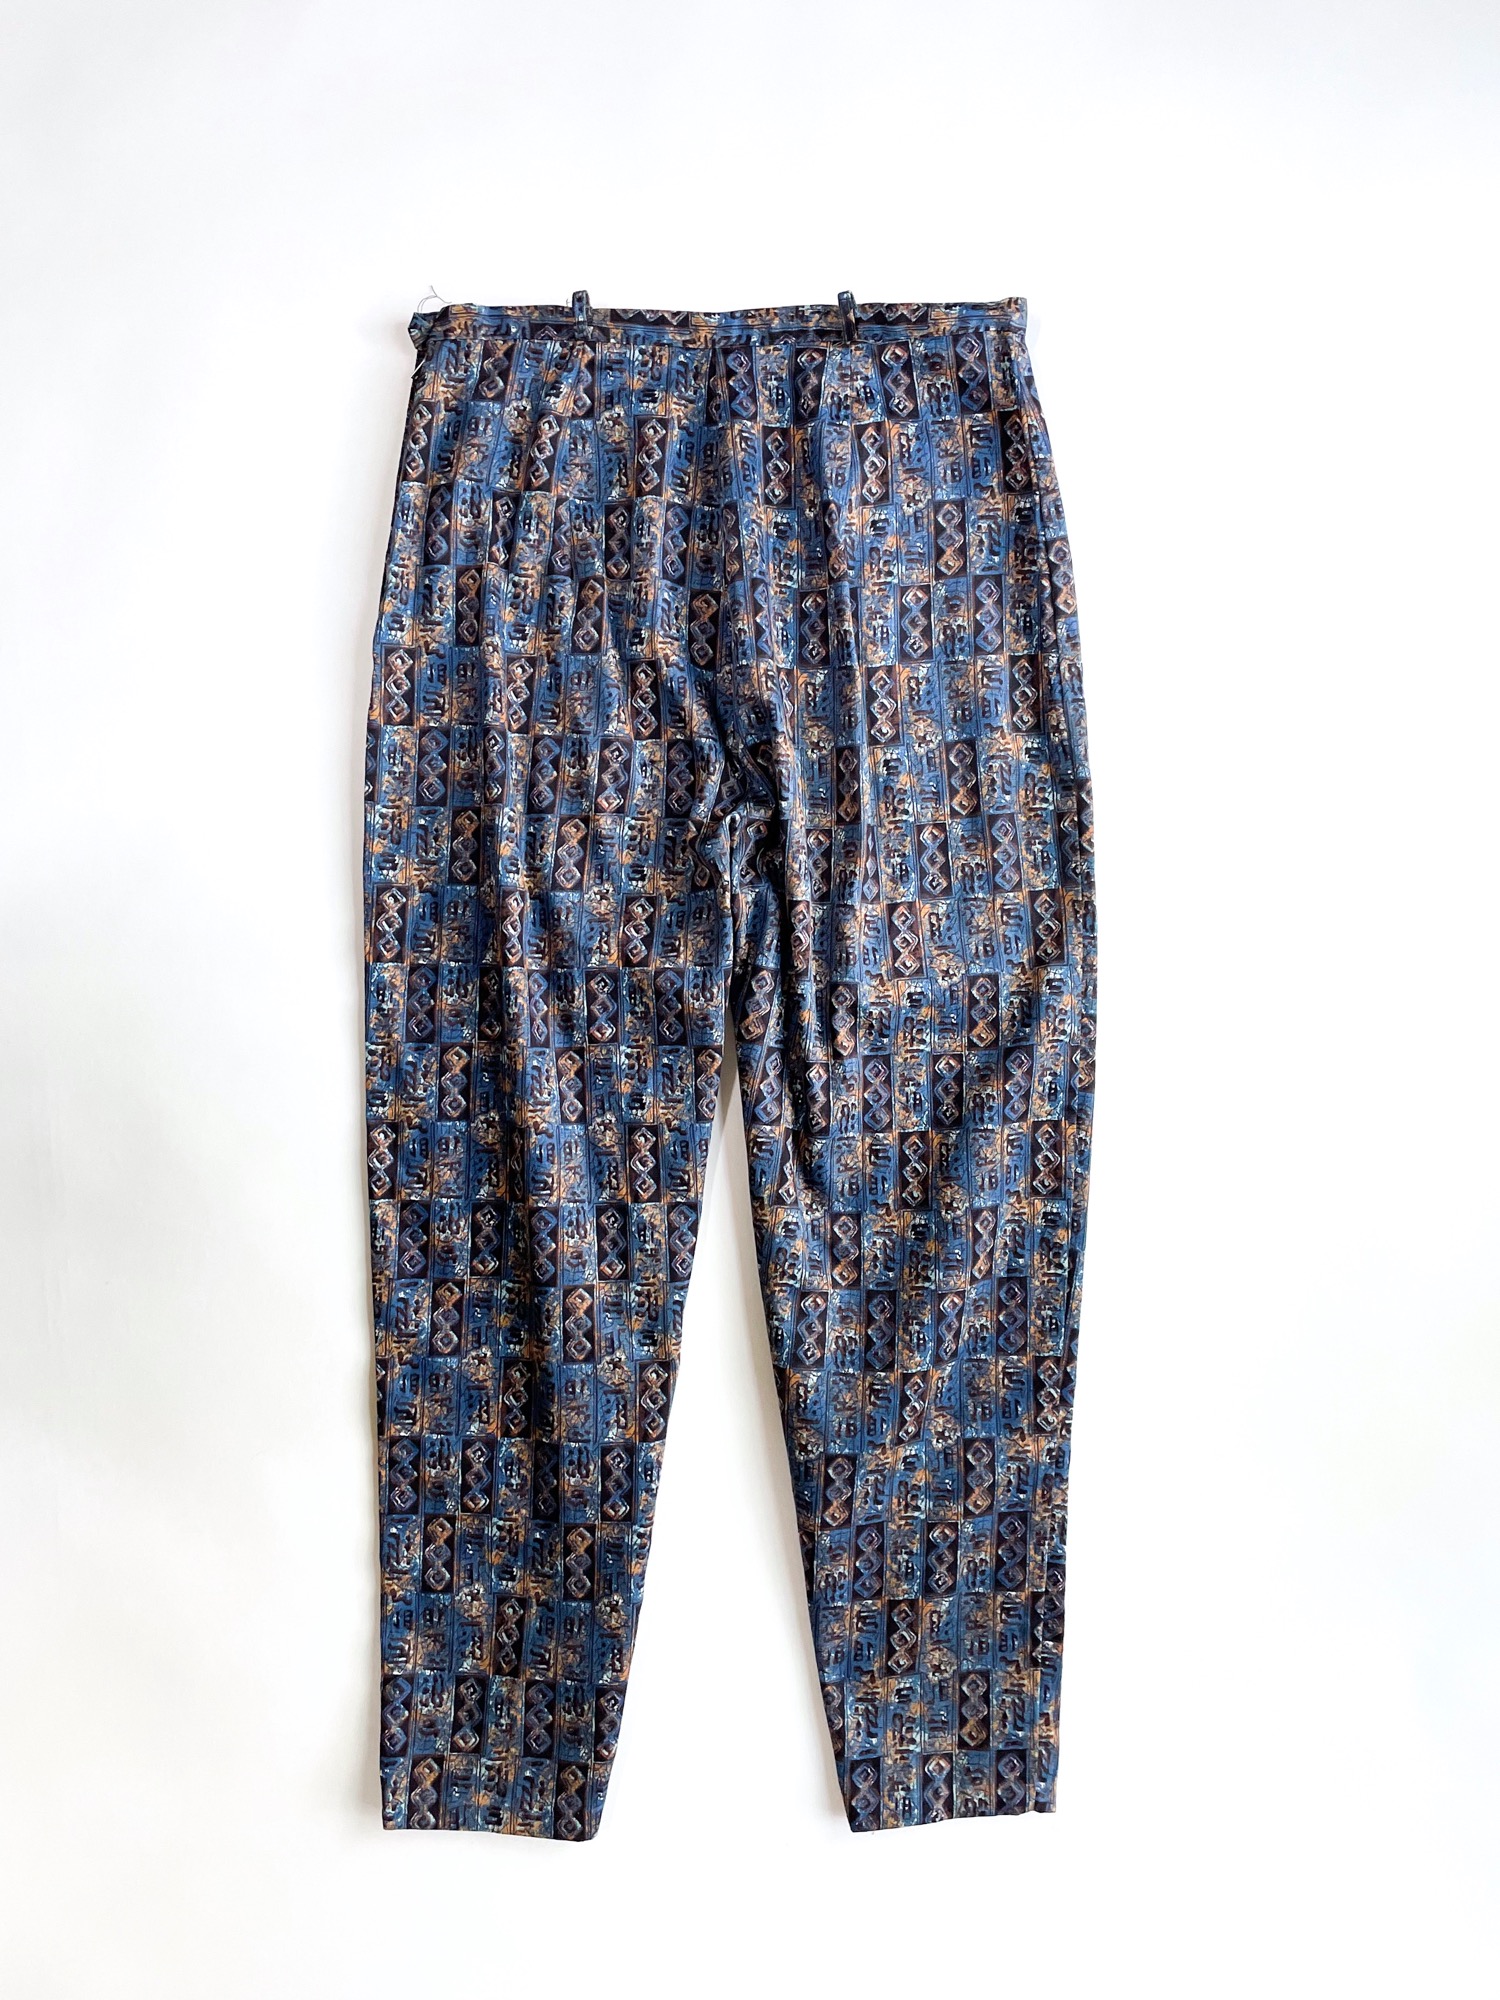 1960s blue abstract print polished cotton pants – Hemlock Vintage Clothing